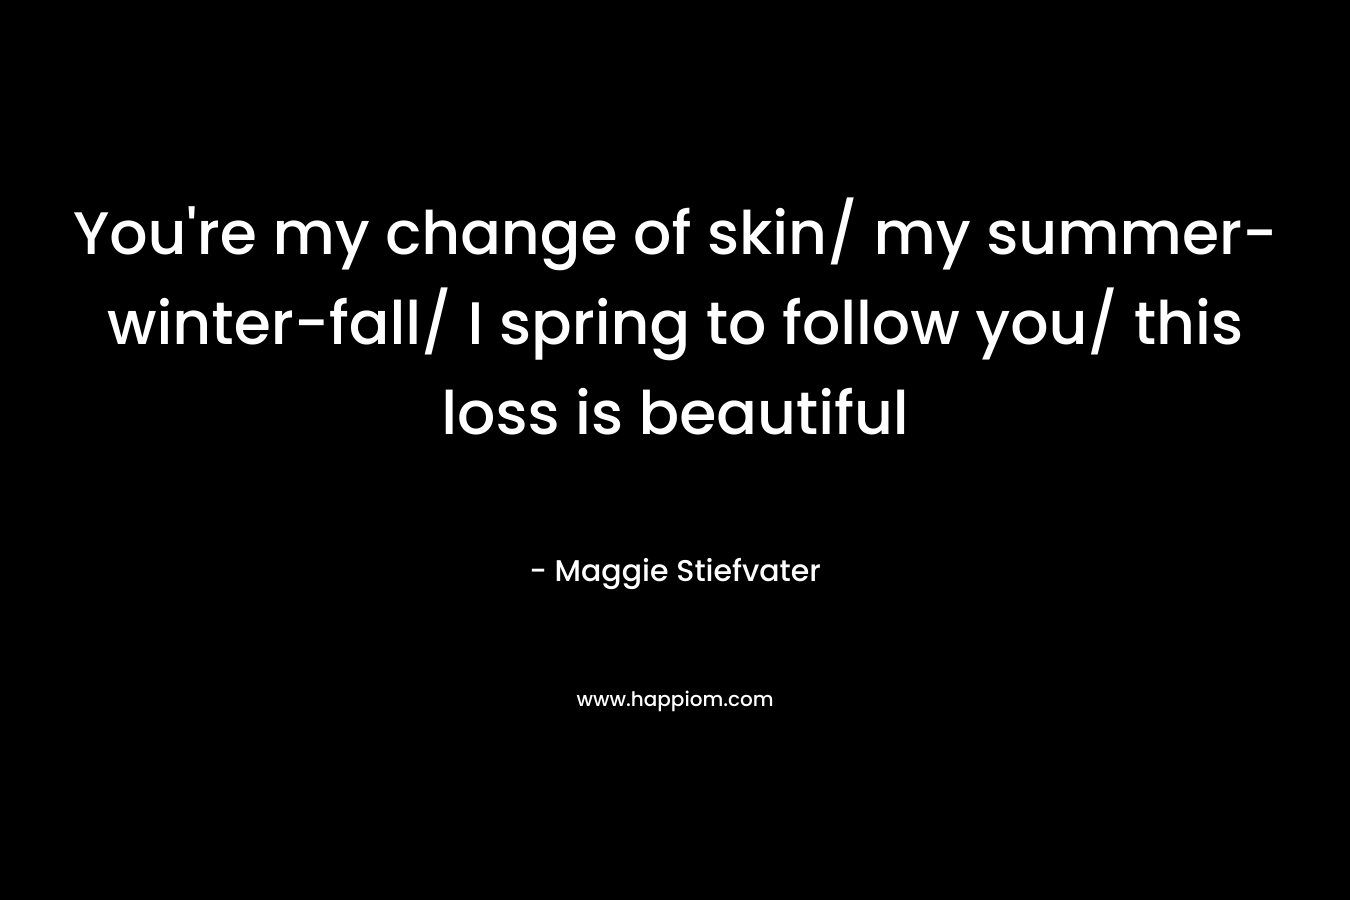 You're my change of skin/ my summer-winter-fall/ I spring to follow you/ this loss is beautiful